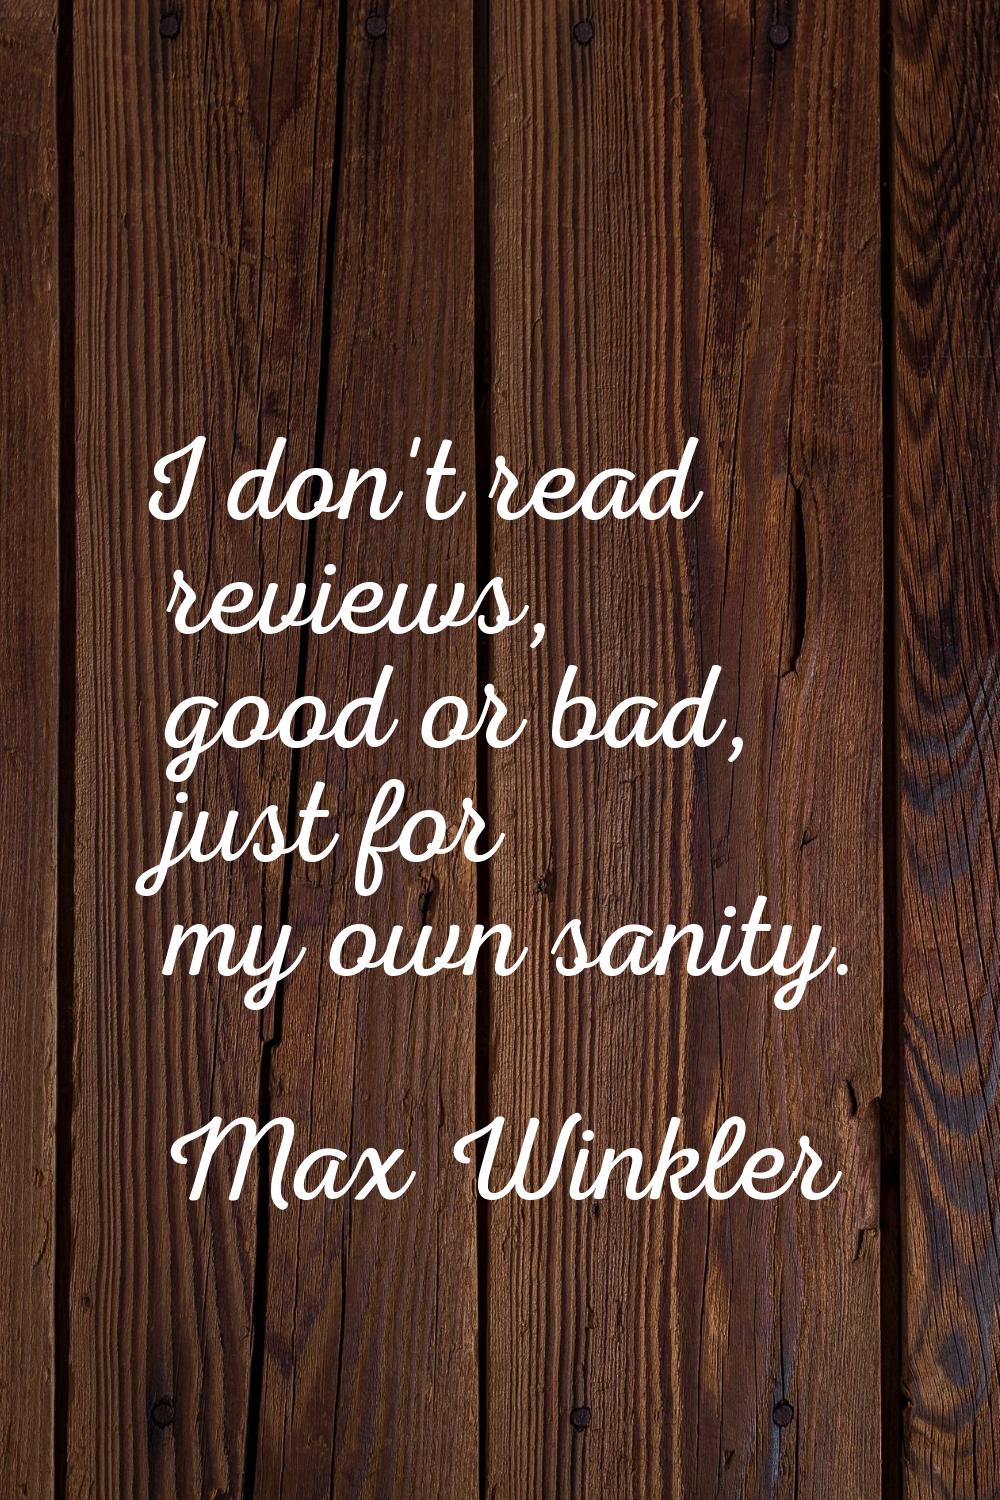 I don't read reviews, good or bad, just for my own sanity.